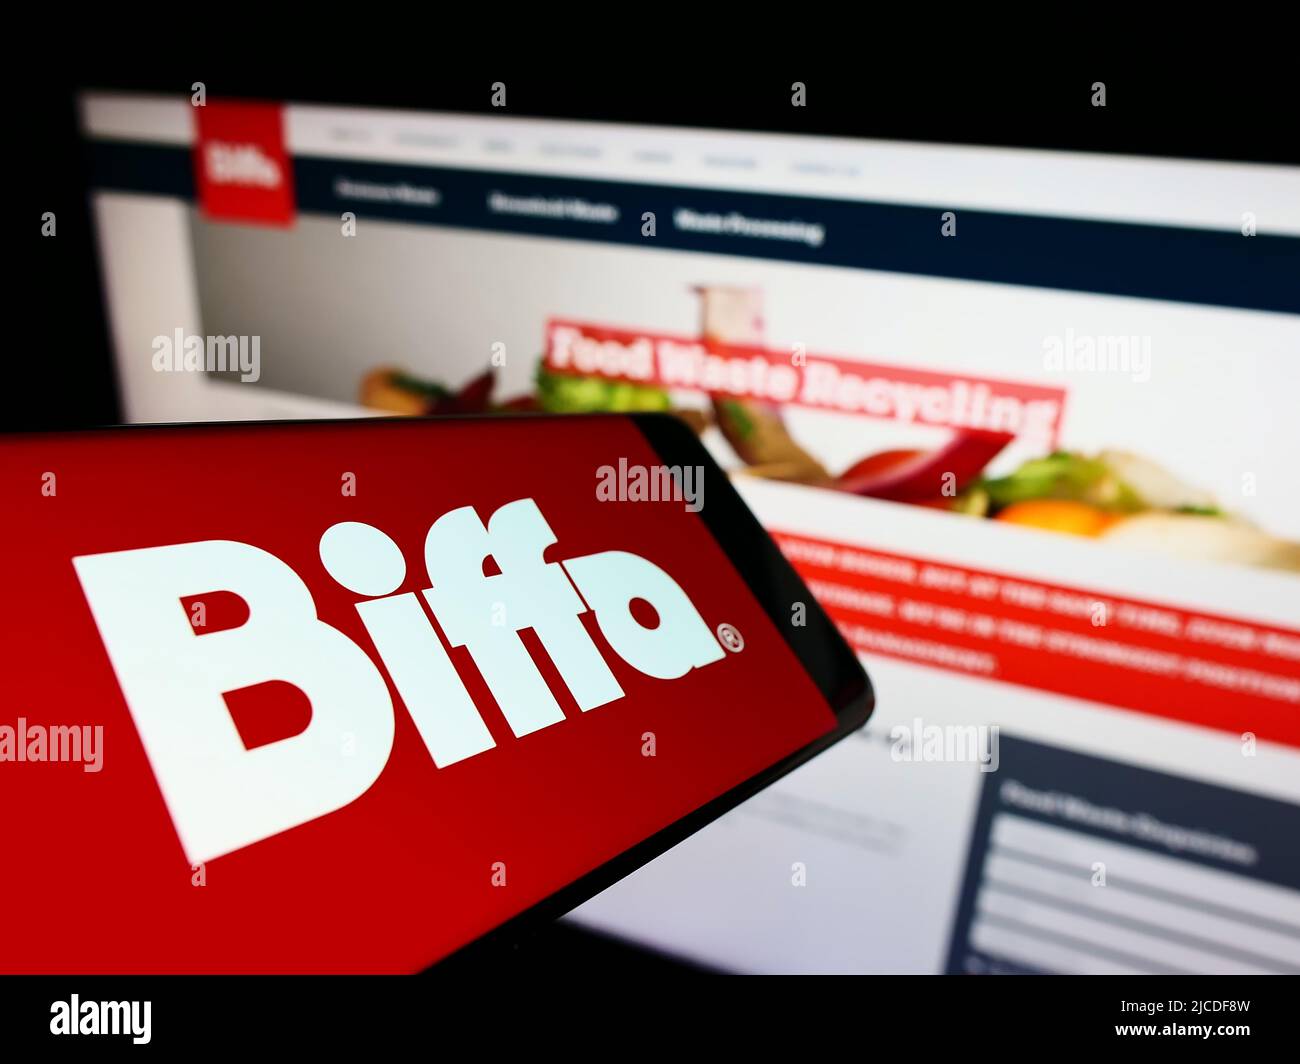 Cellphone with logo of British waste management company Biffa plc on screen in front of business website. Focus on center of phone display. Stock Photo